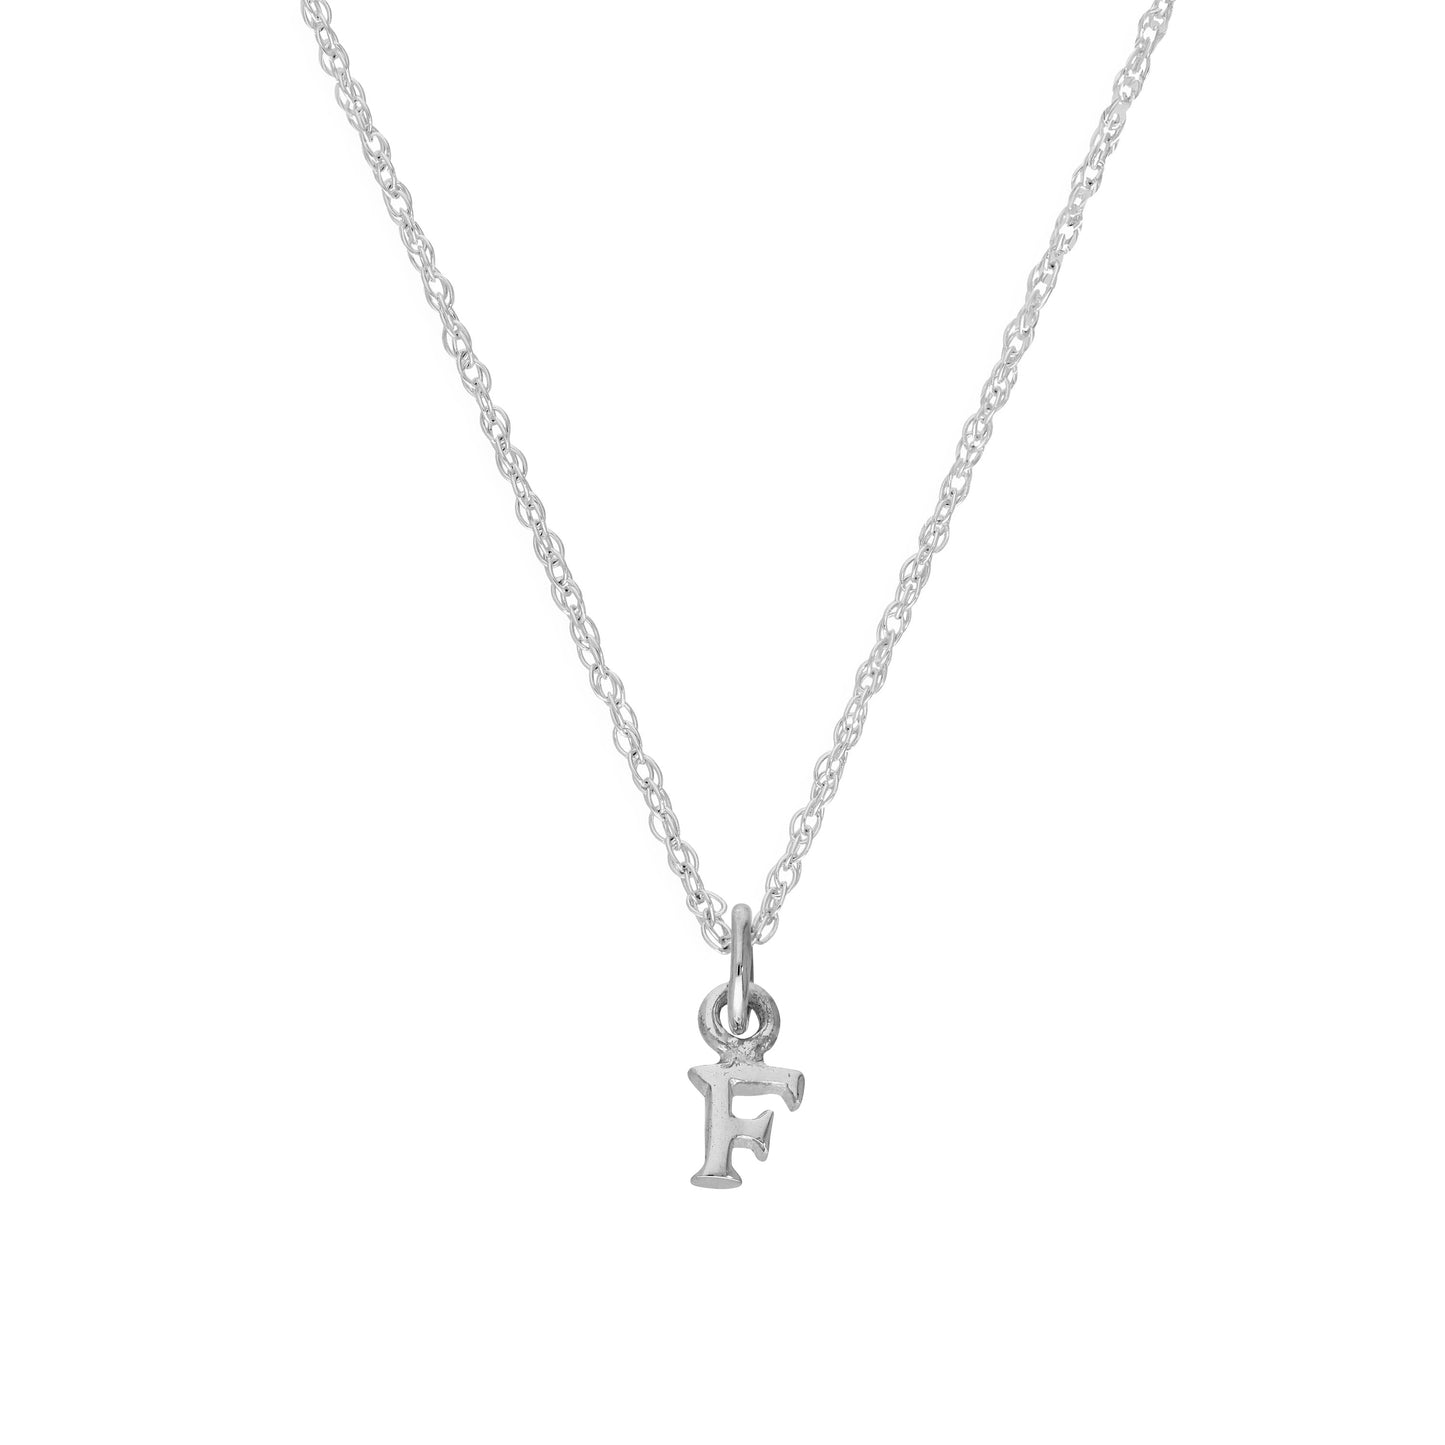 Tiny Sterling Silver Alphabet Letter F Pendant Necklace 14 - 22 Inches